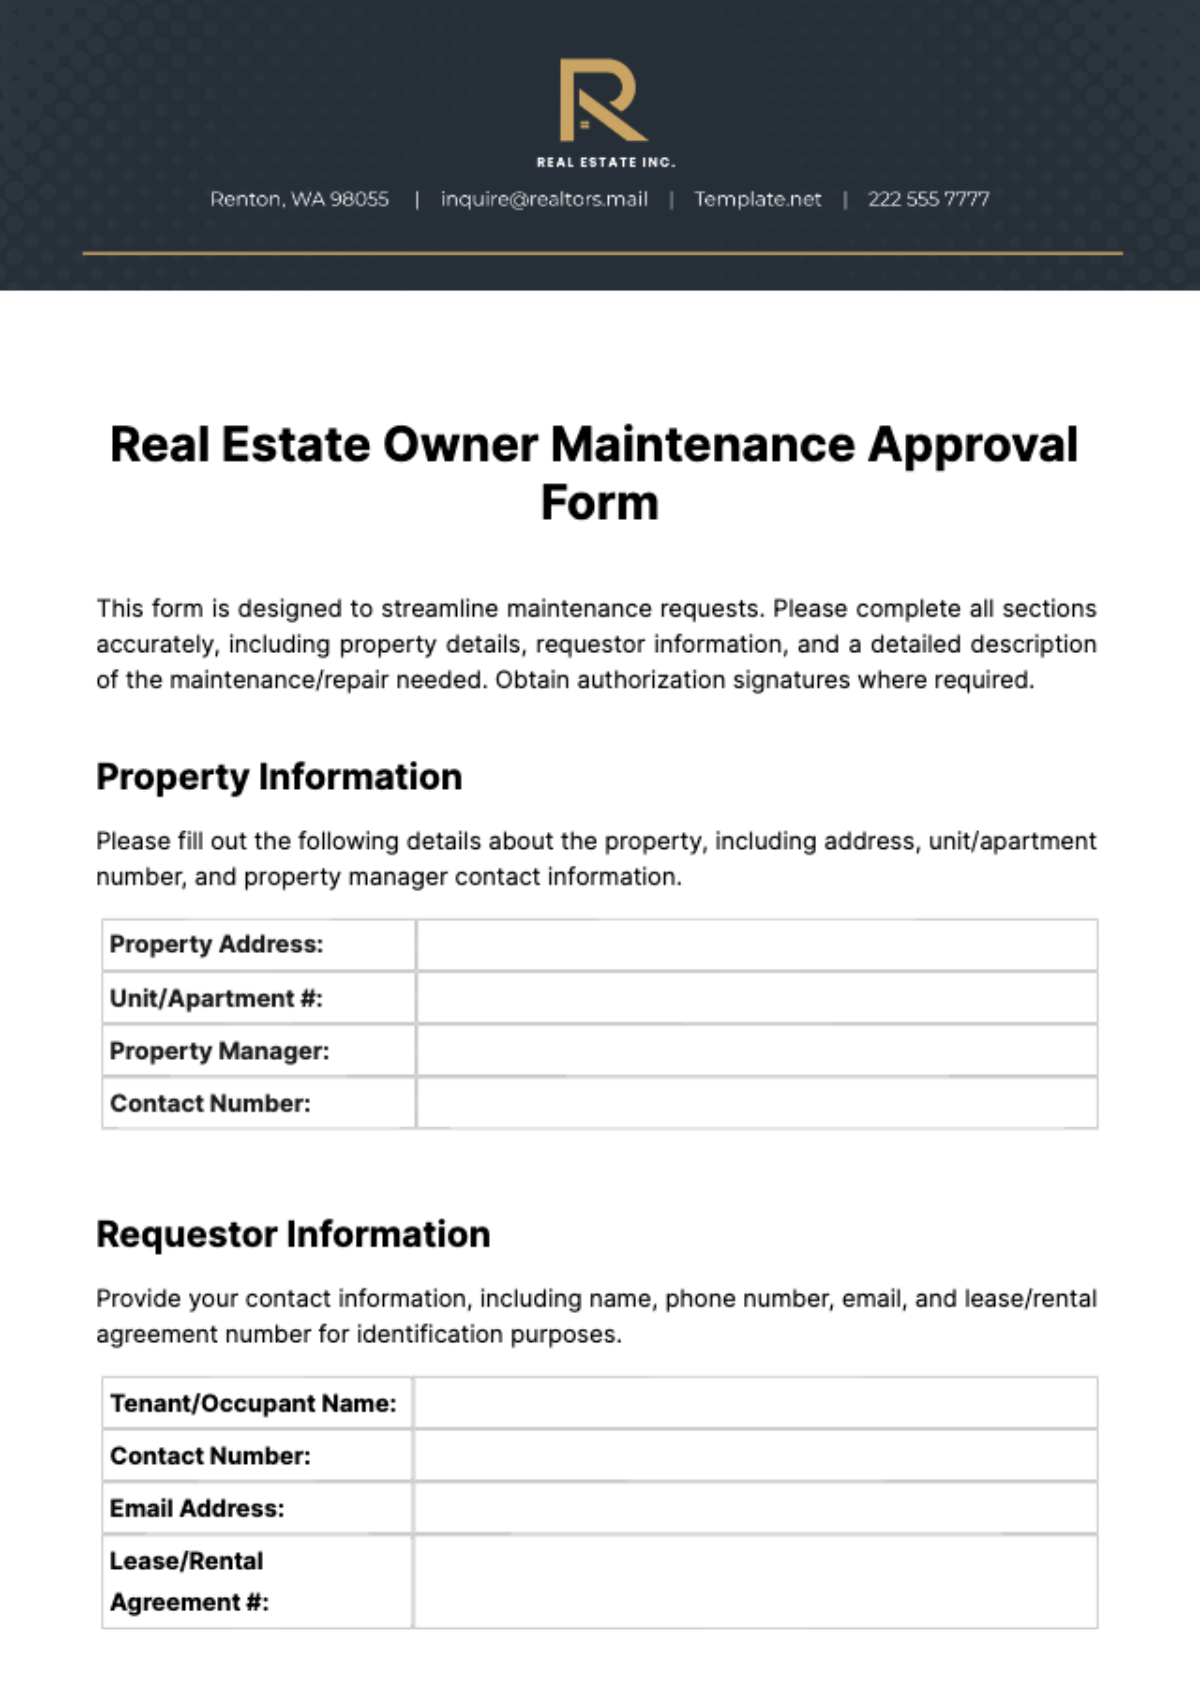 Real Estate Owner Maintenance Approval Form Template